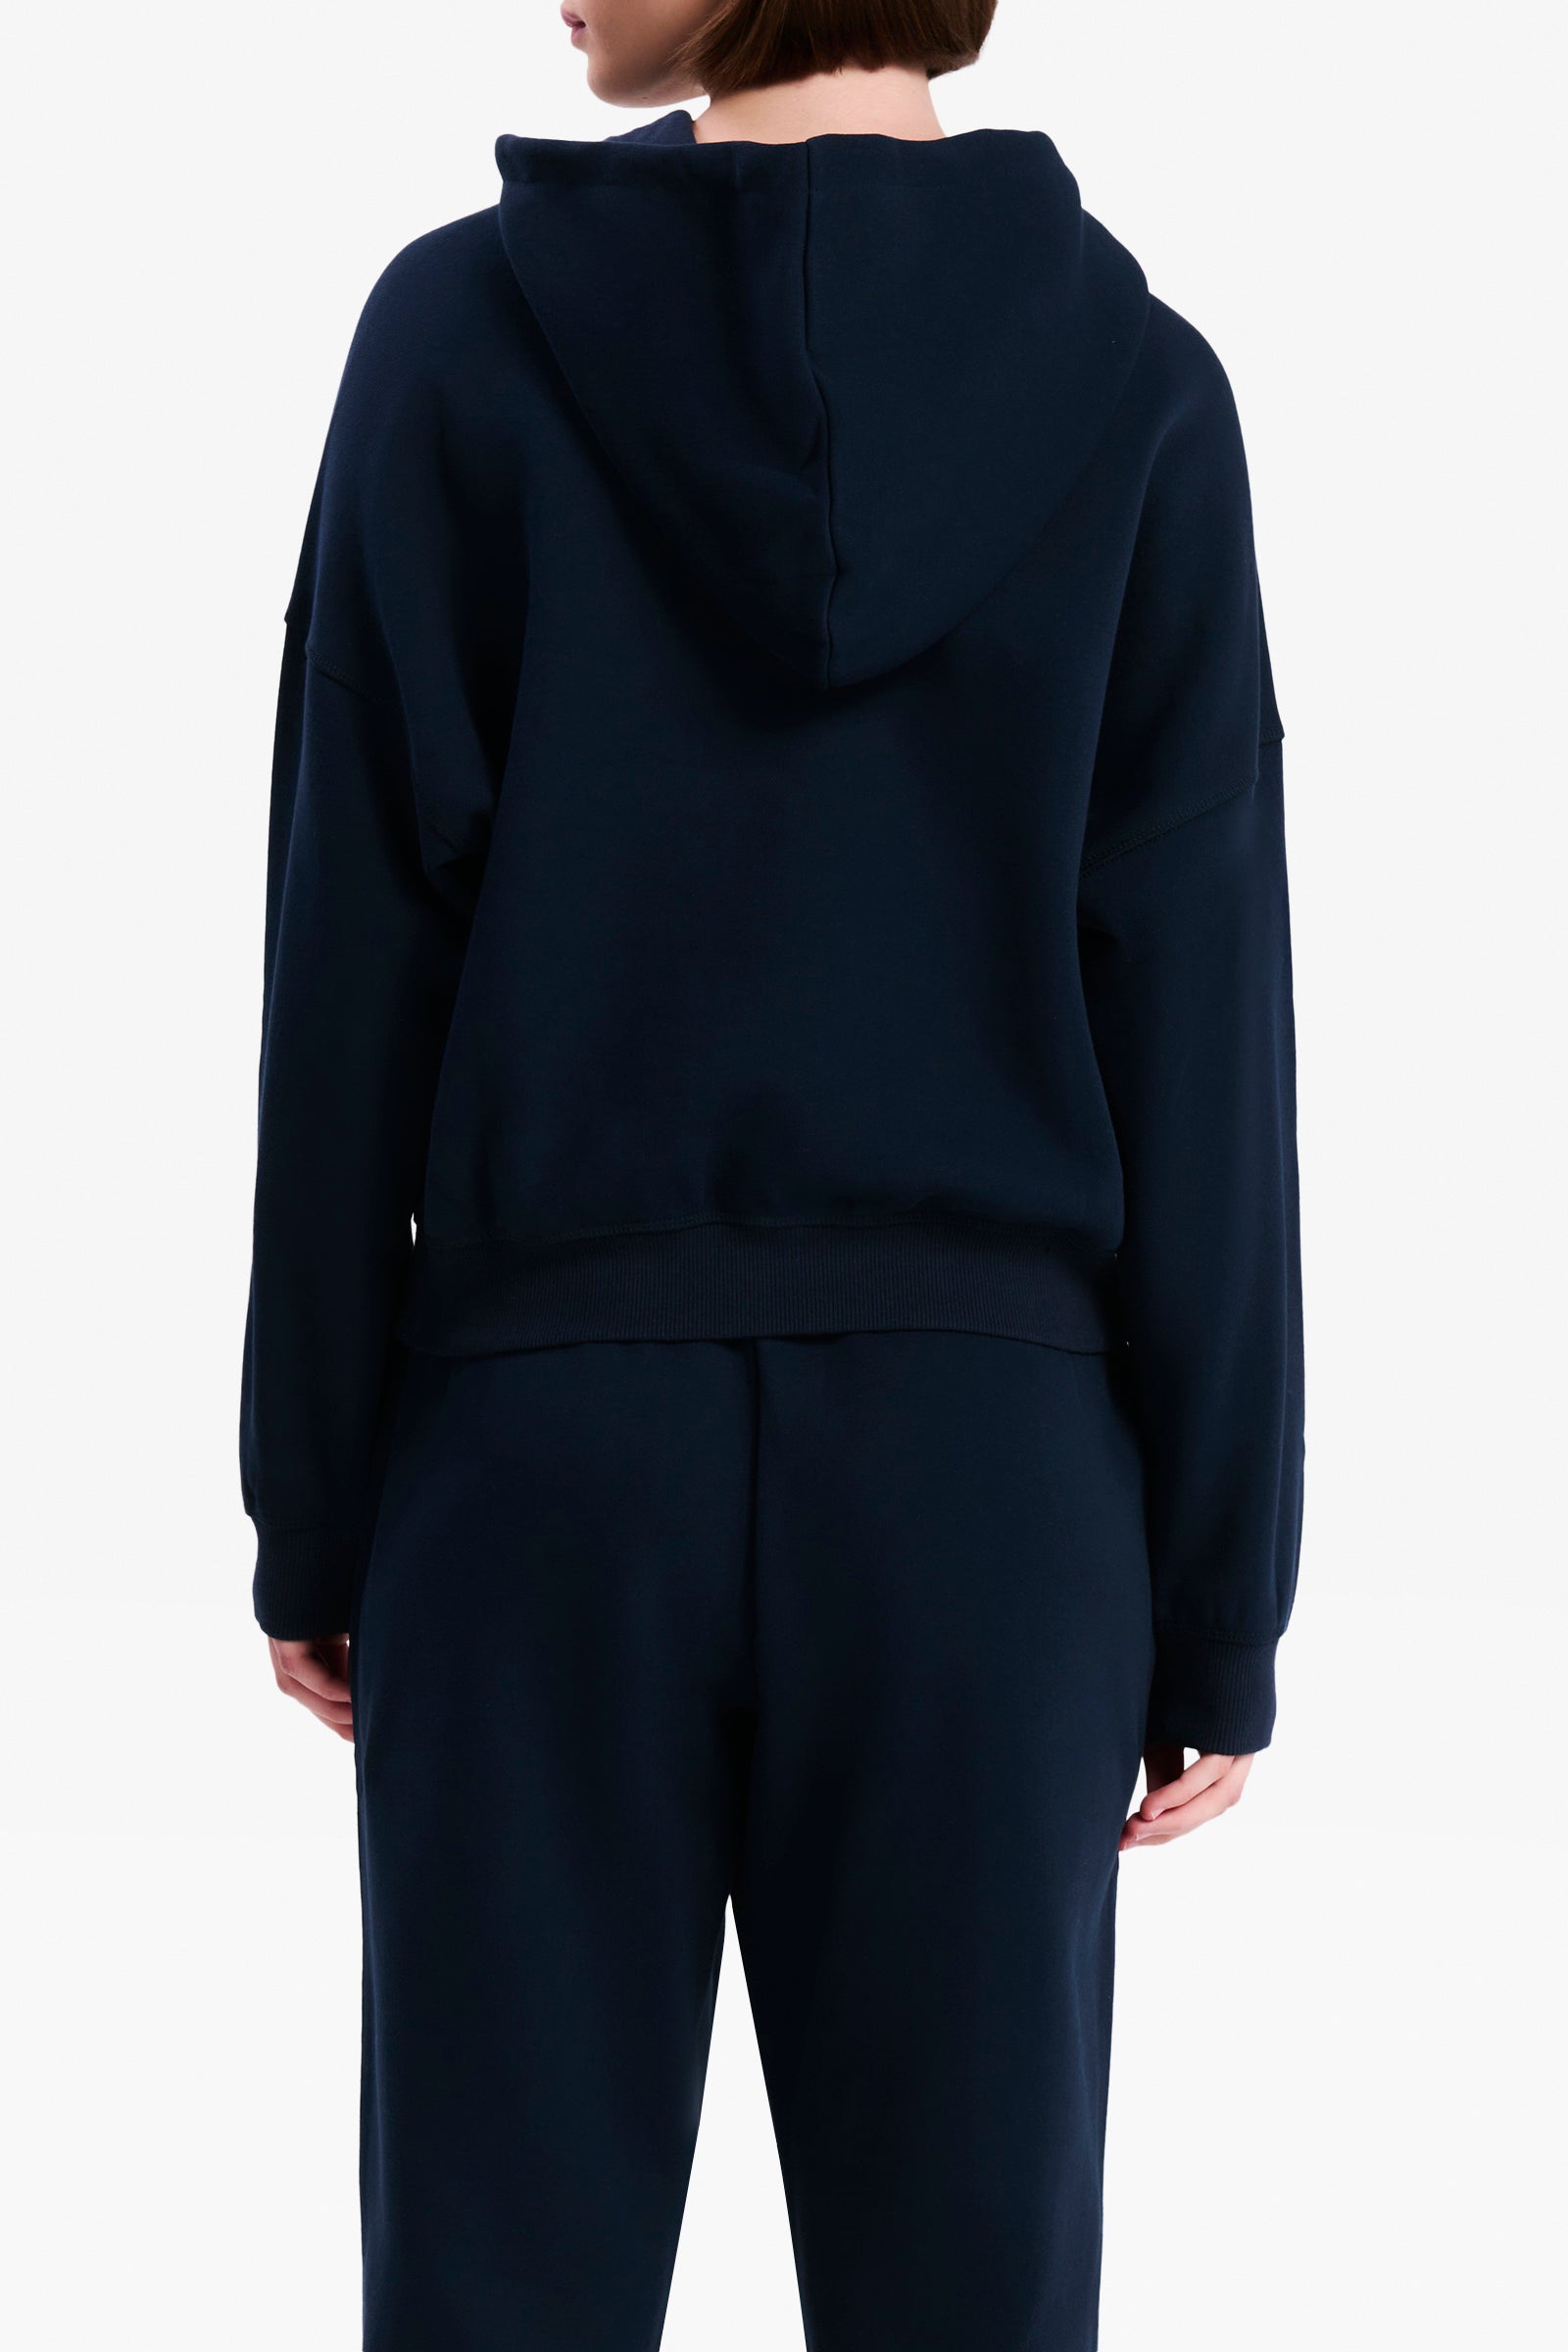 Nude Lucy Carter Classic Hoodie in Midnight